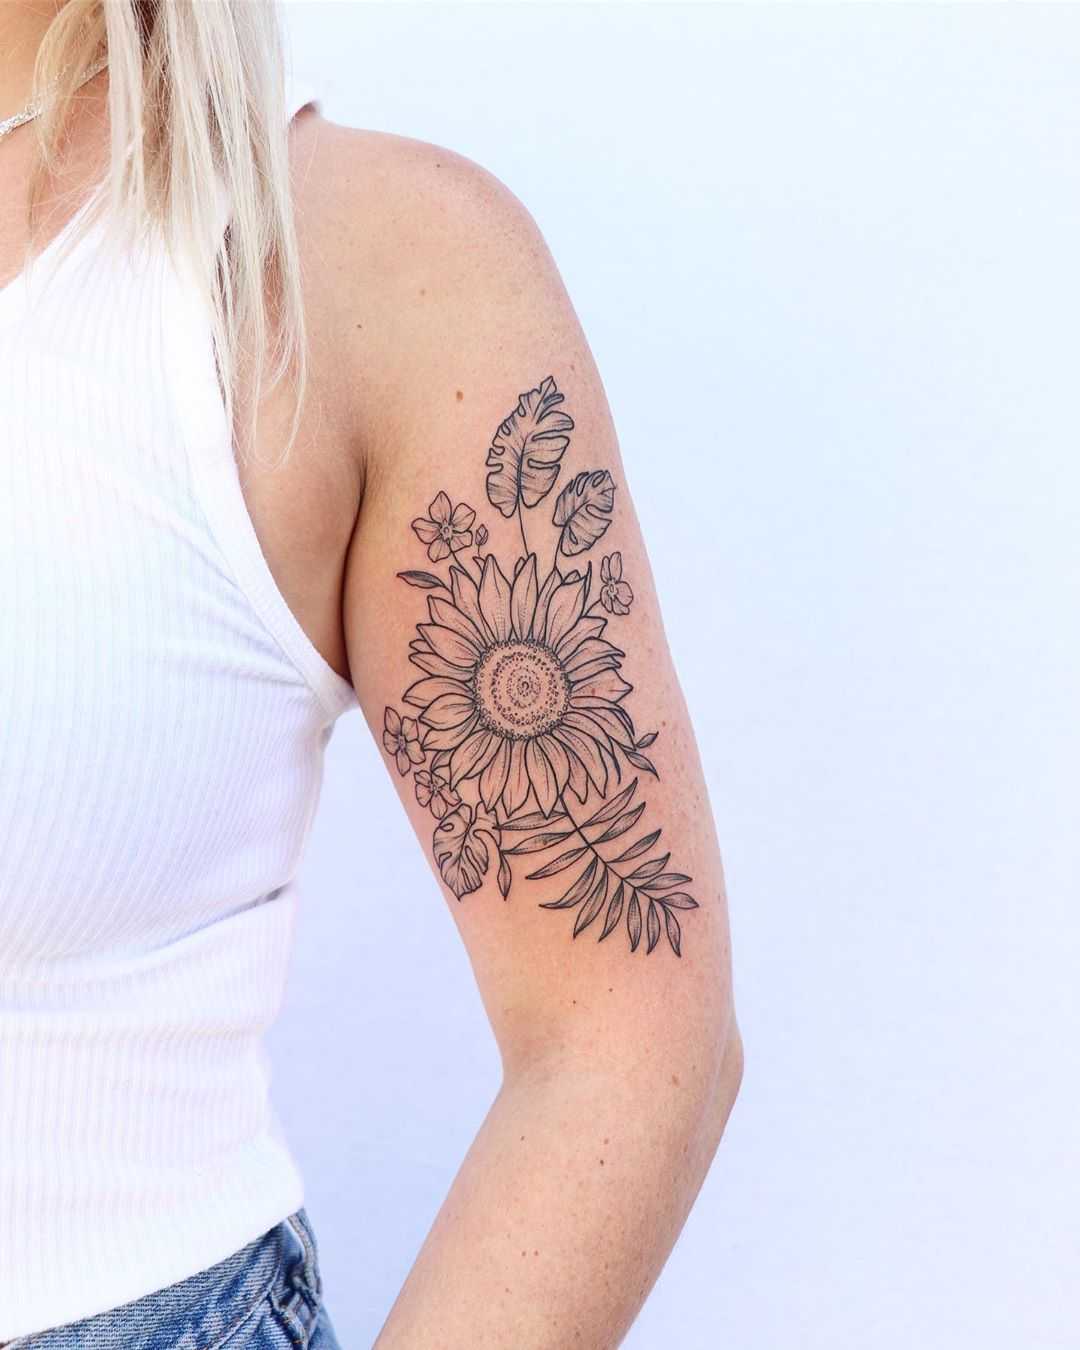 Sunflowers, monstera, palms and forget me nots by Zaya Hastra